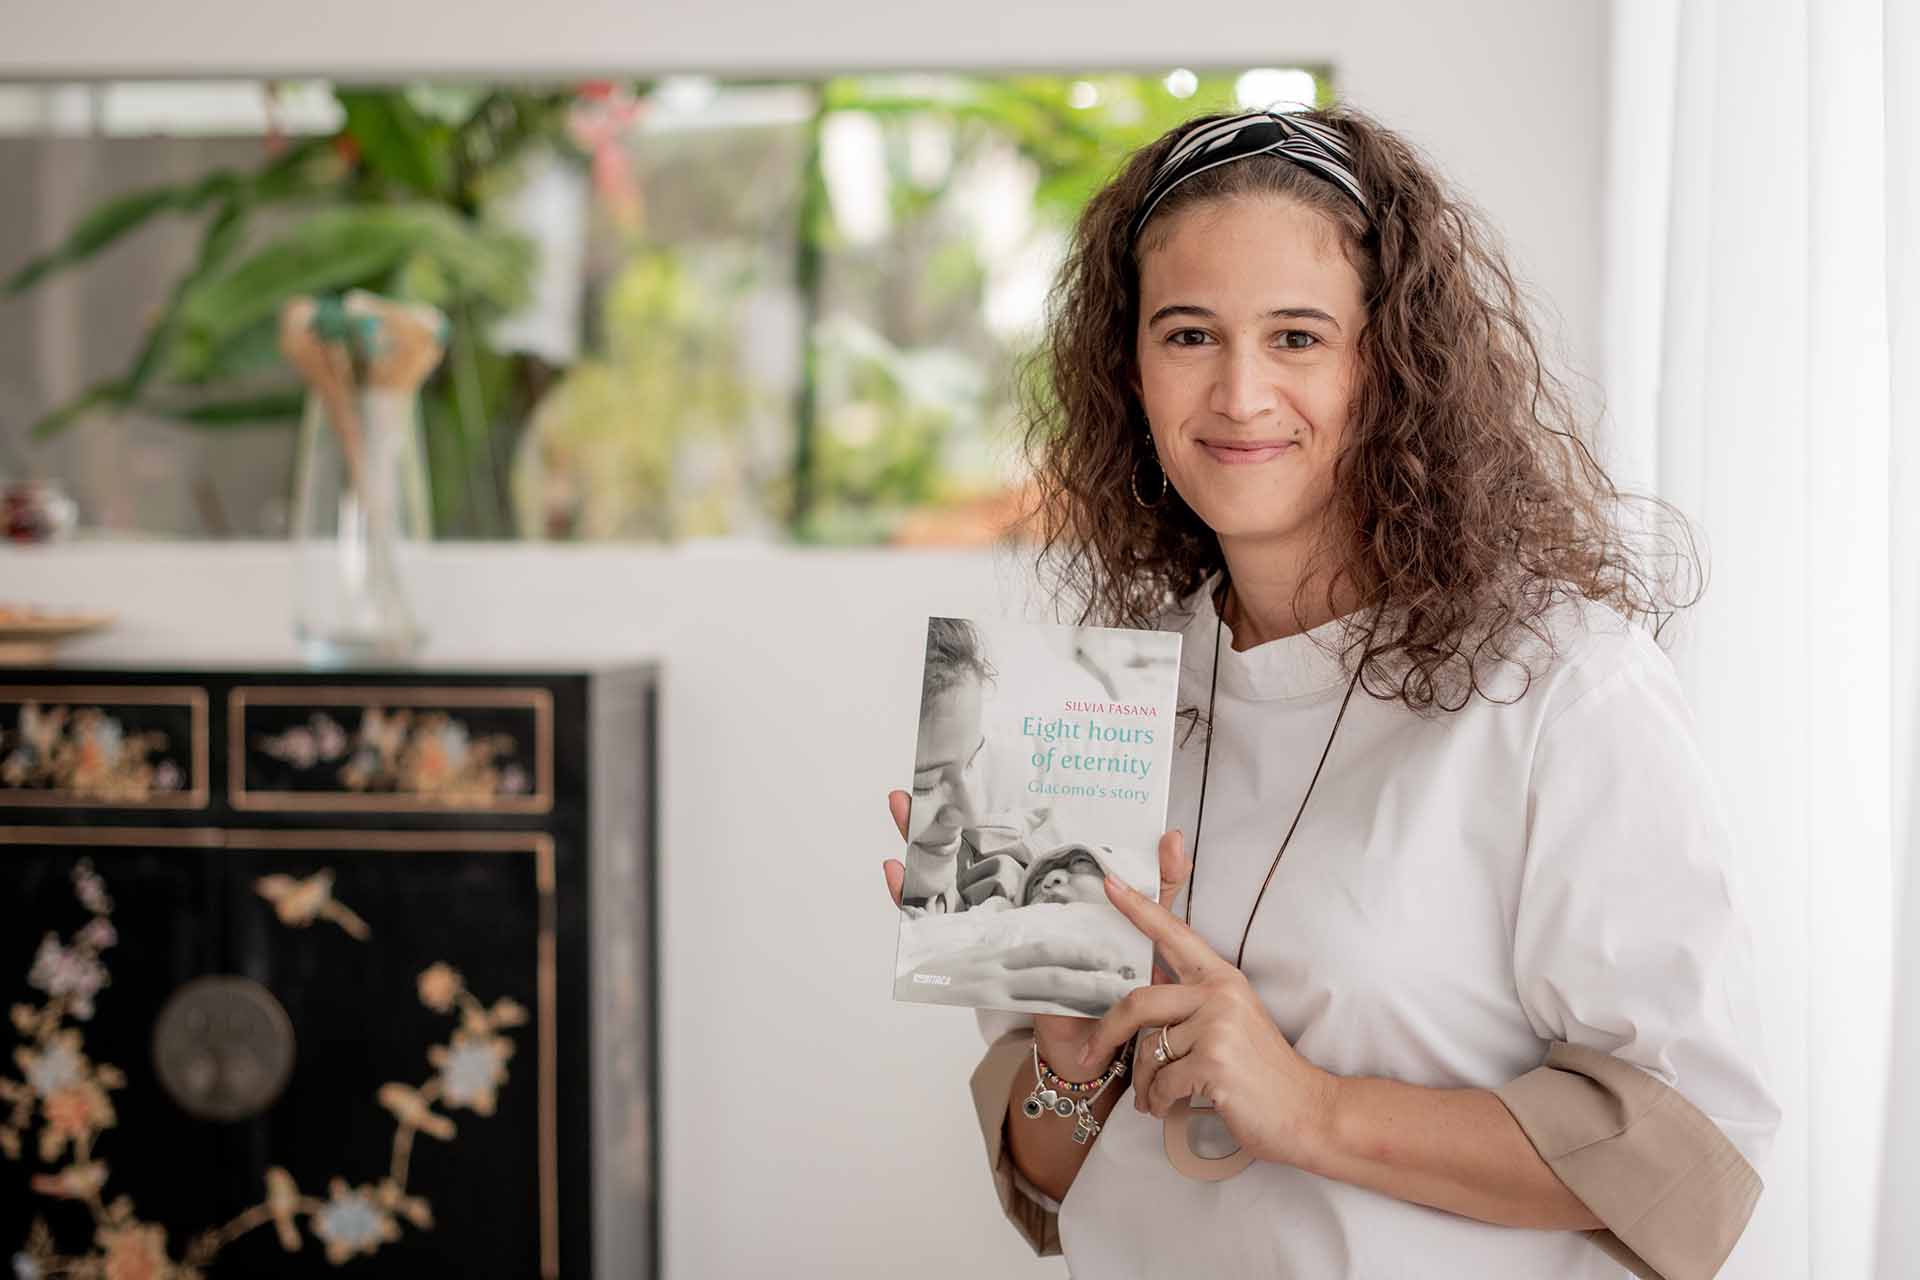 Silvia Fasana holding her book - Eight Hours of Eternity.